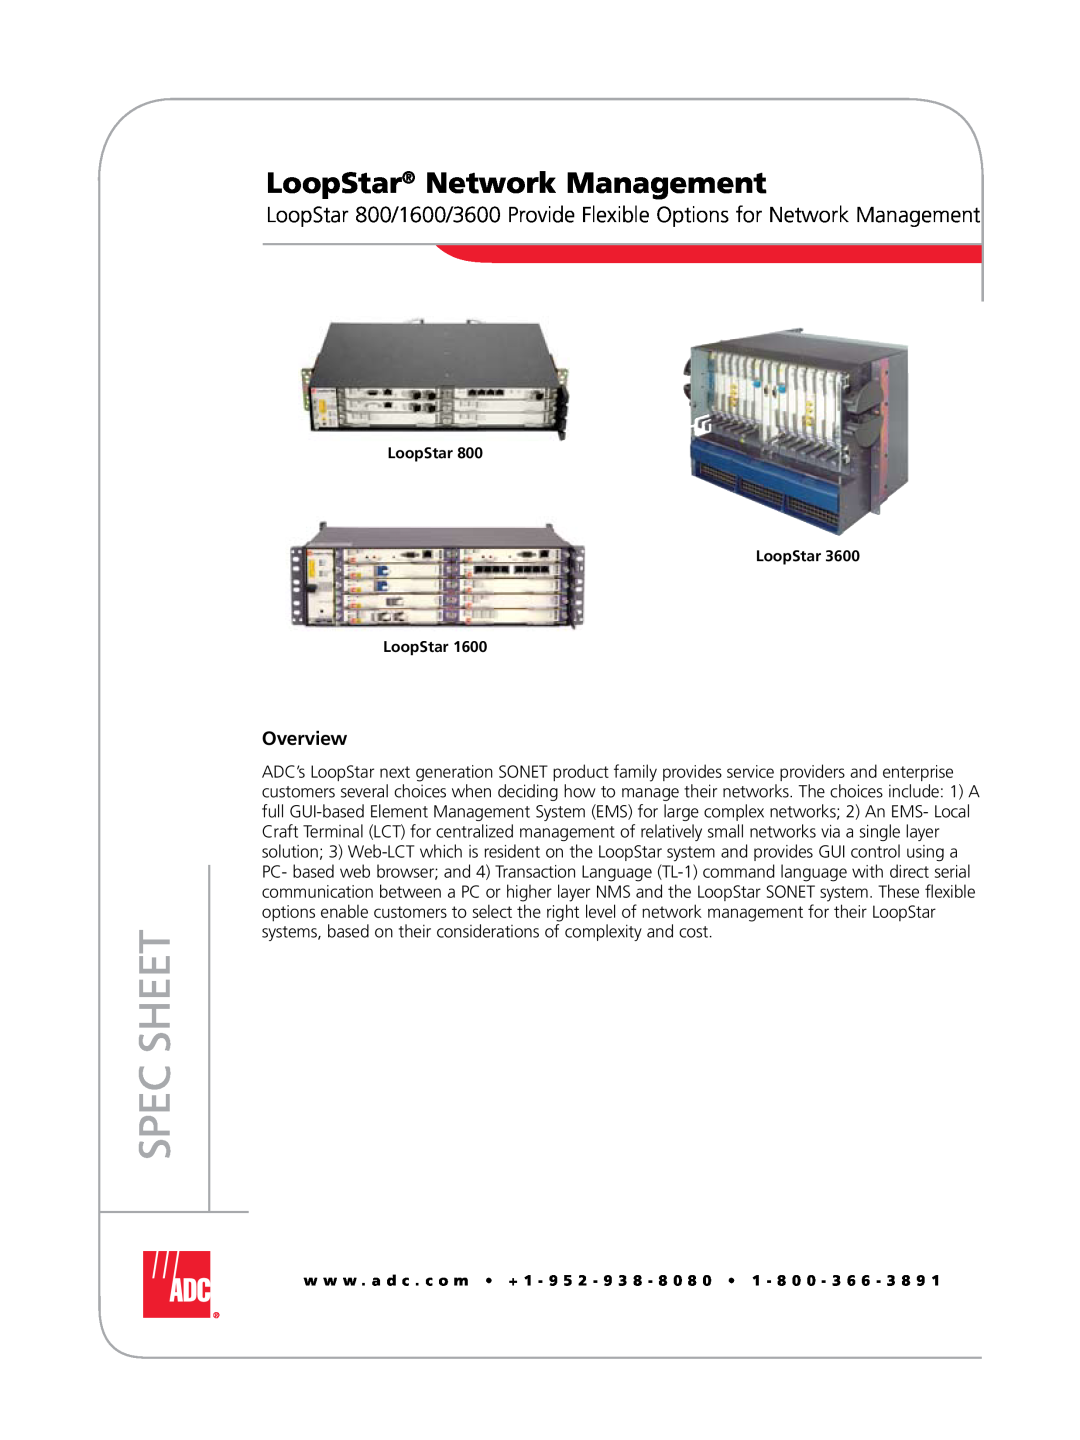 ADC 3600, 1600 manual LoopStar Network Management, Spec Sheet, Overview 